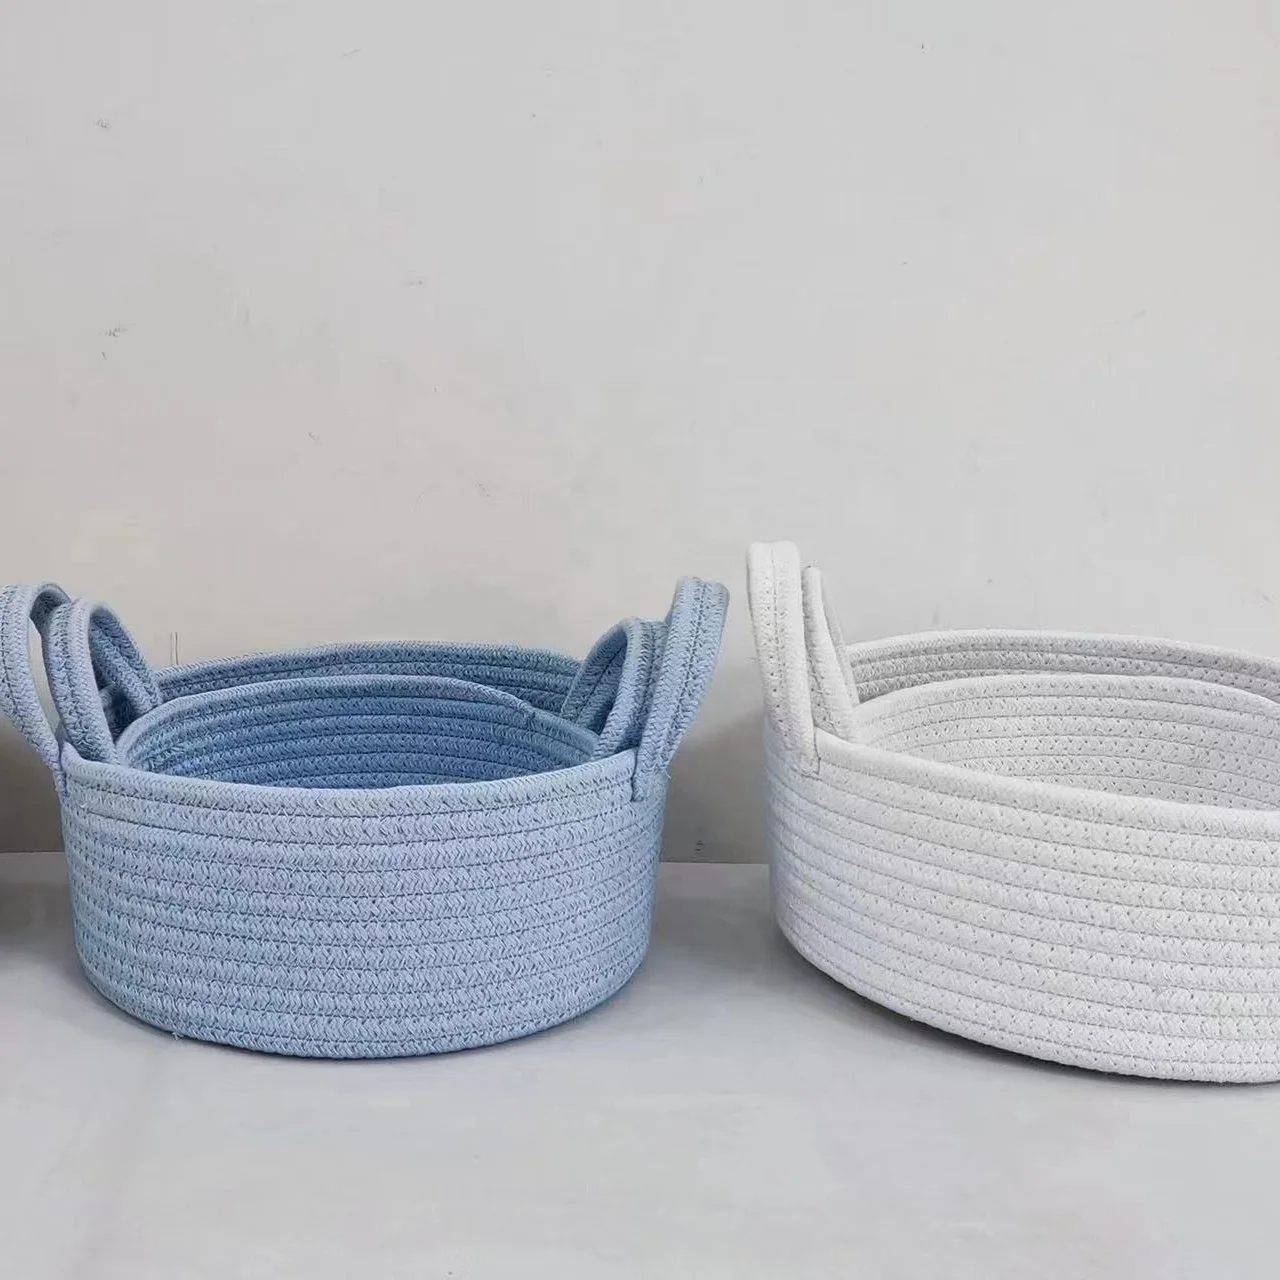 Wholesale Cute Woven Cotton Rope Basket Kids With Tassel For The Baby Laundry Basket Cotton Storage Basket